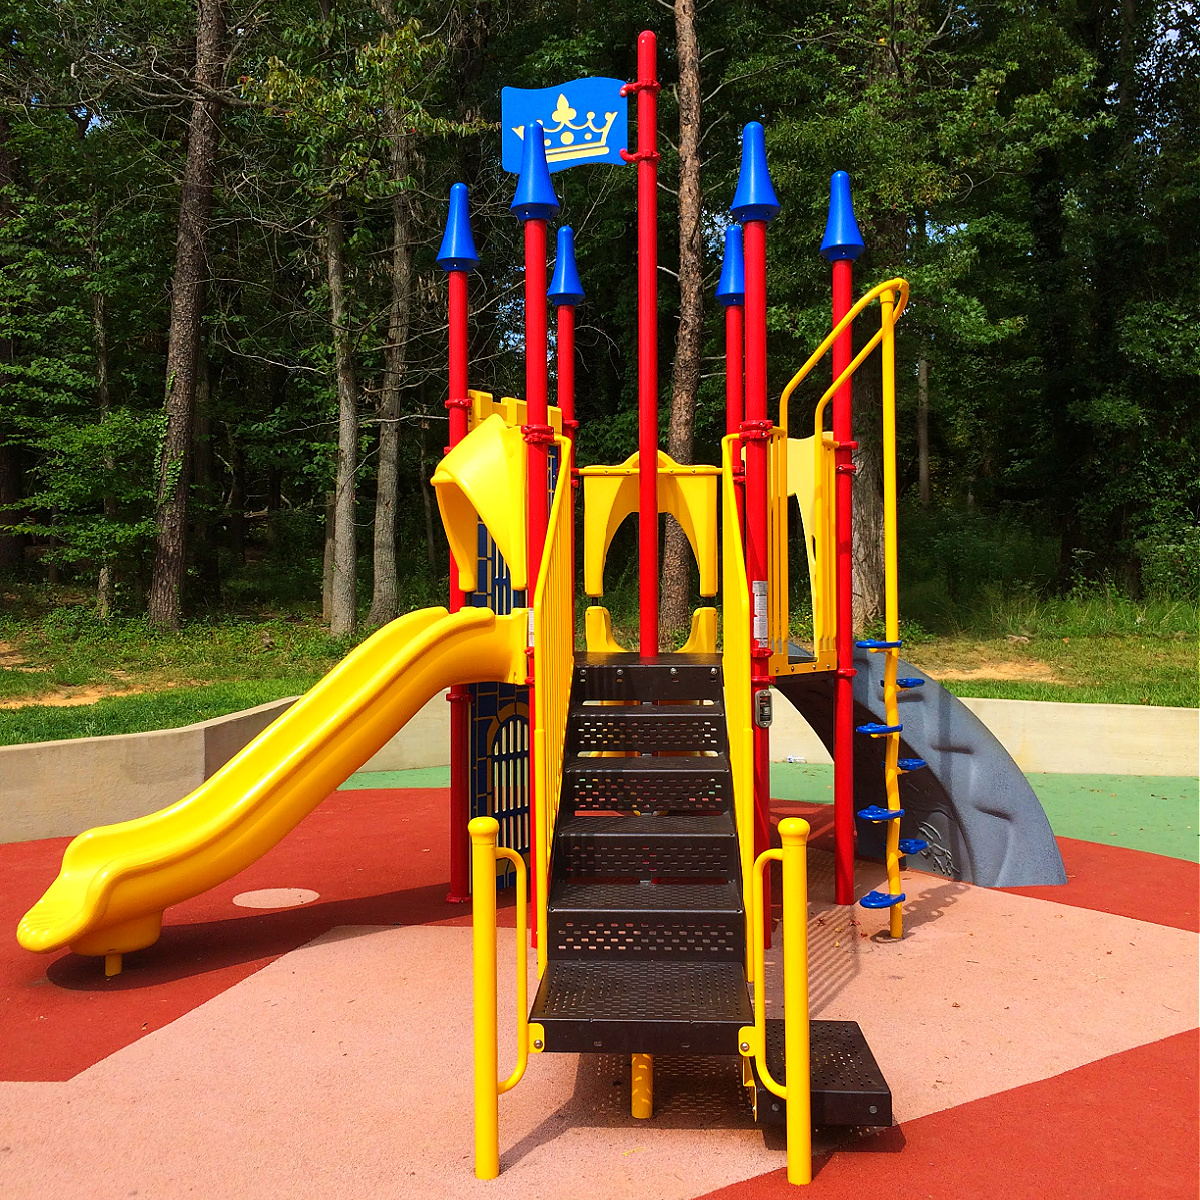 King and Queen Imagination Playground Cheverly-Euclid
